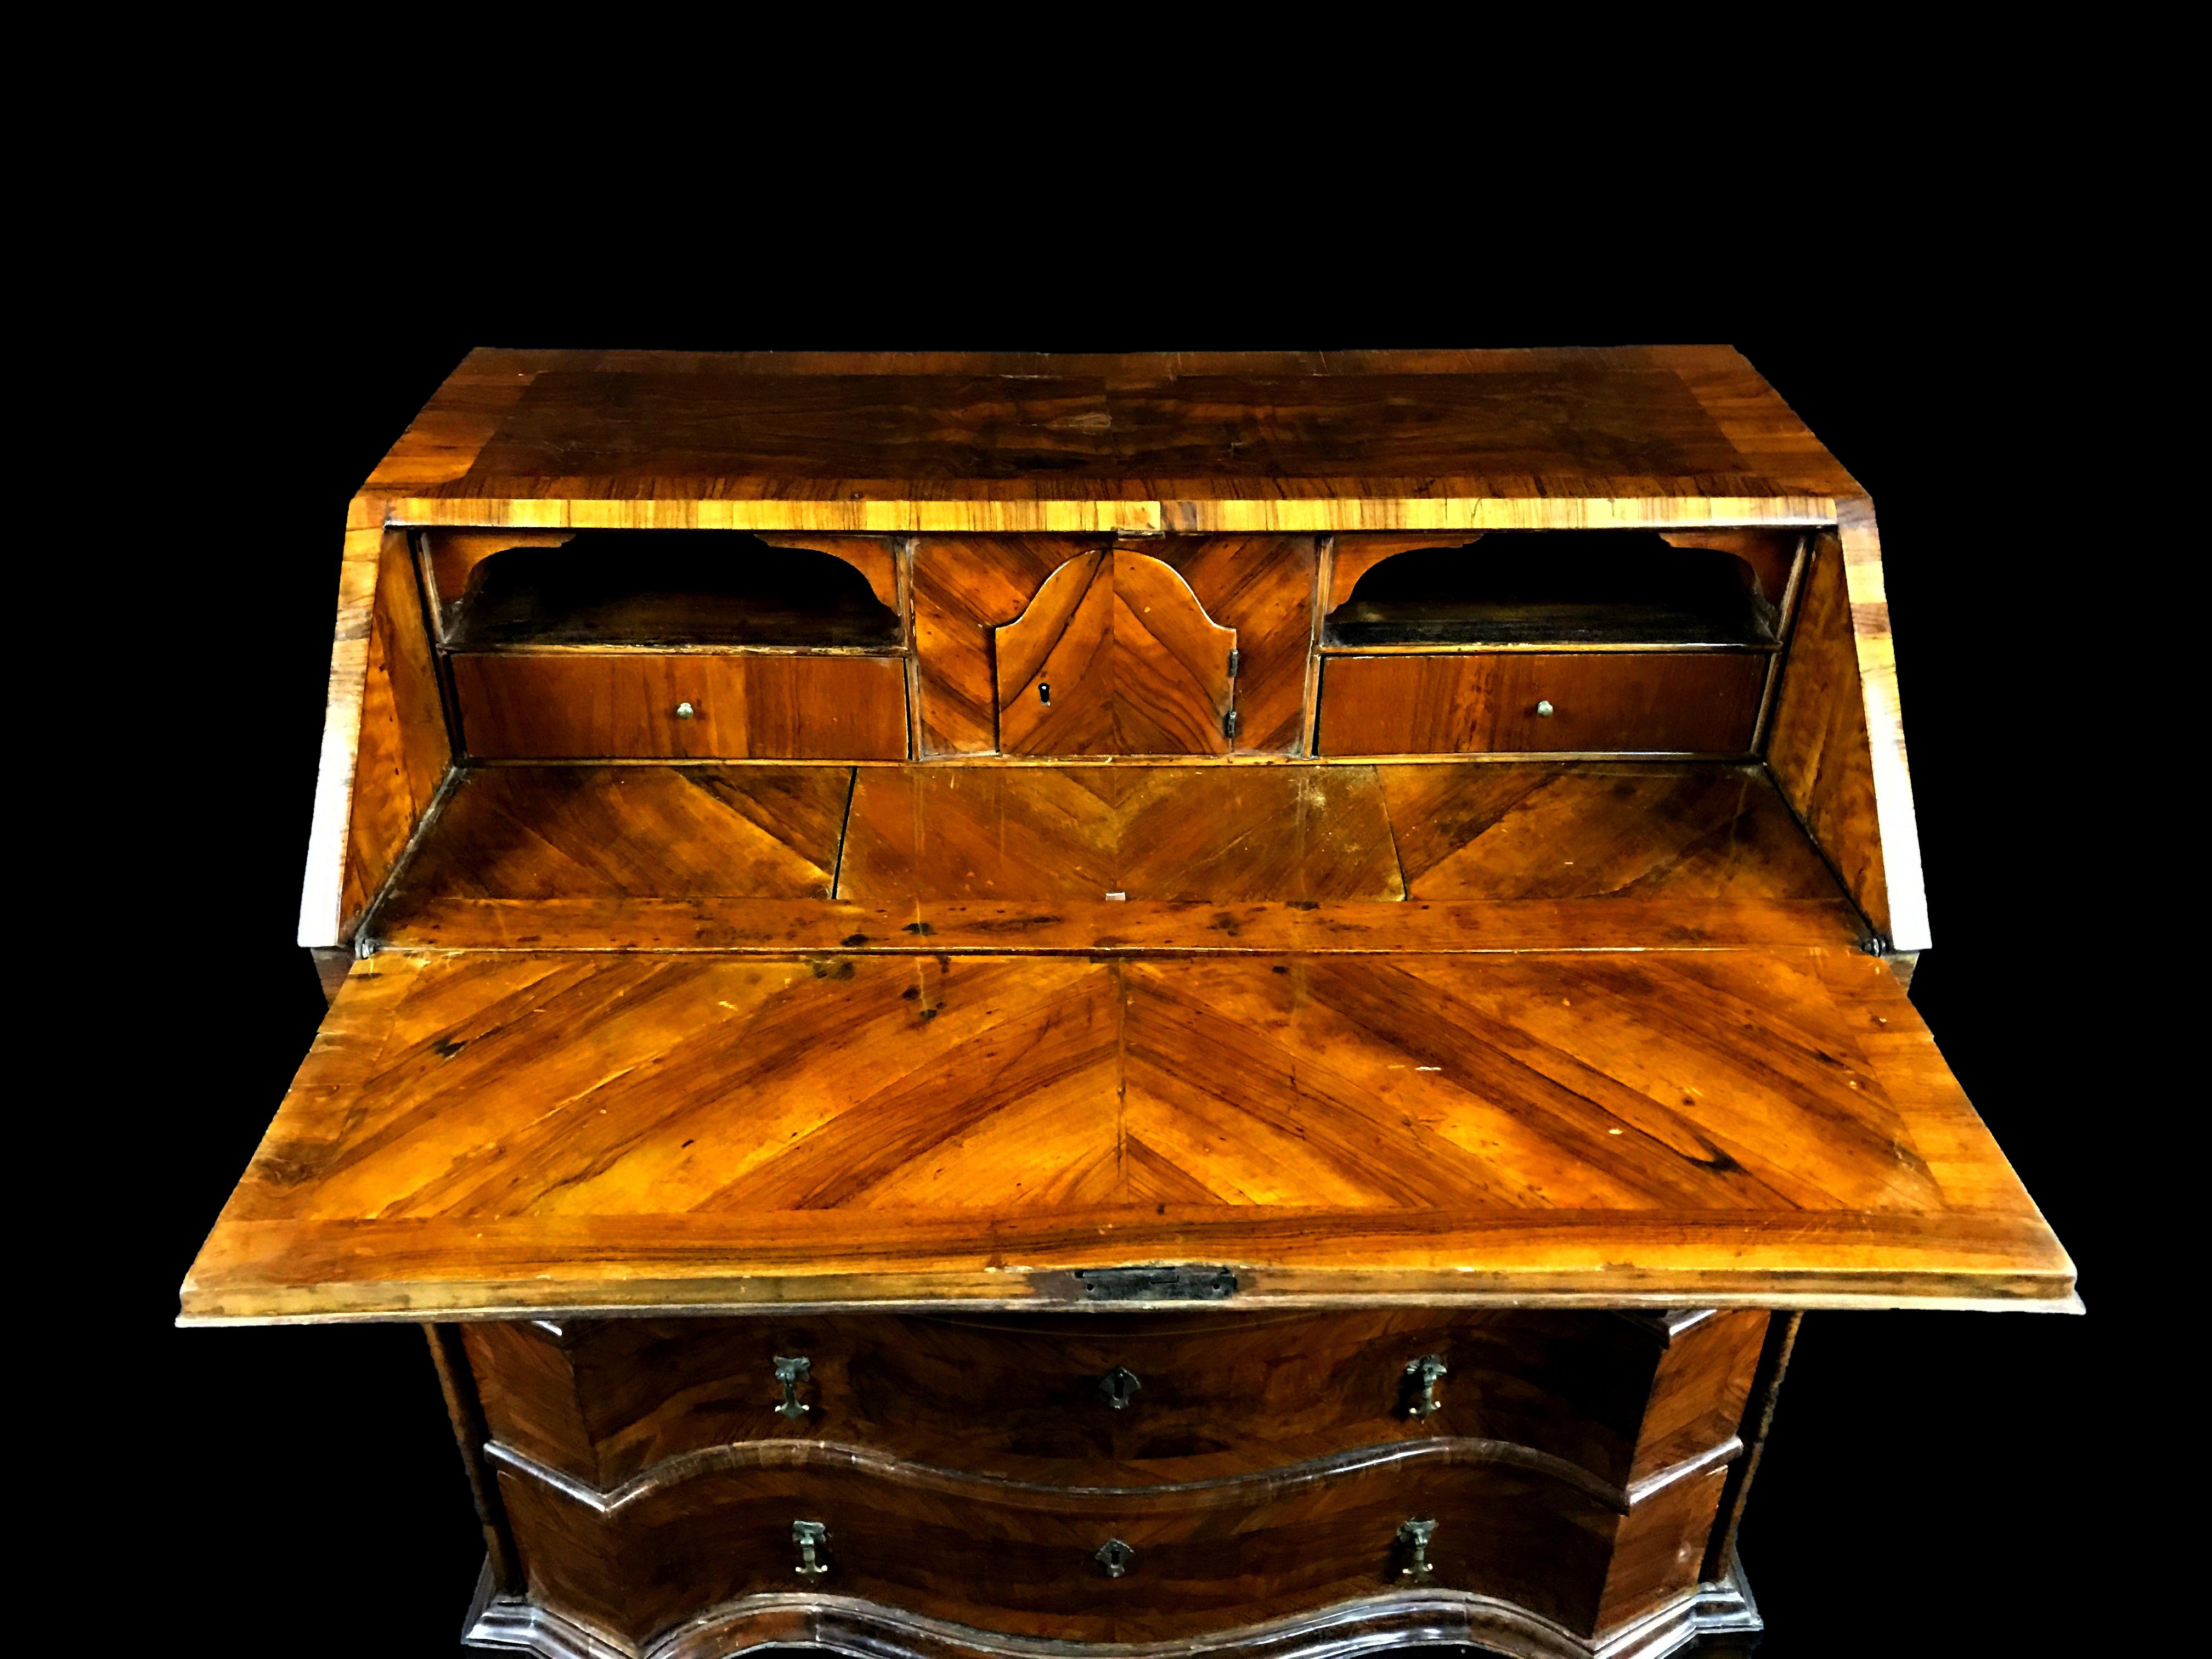 Inlay 18th Century, Italian Walnut Wood Chest of Drawers with Secrétaire